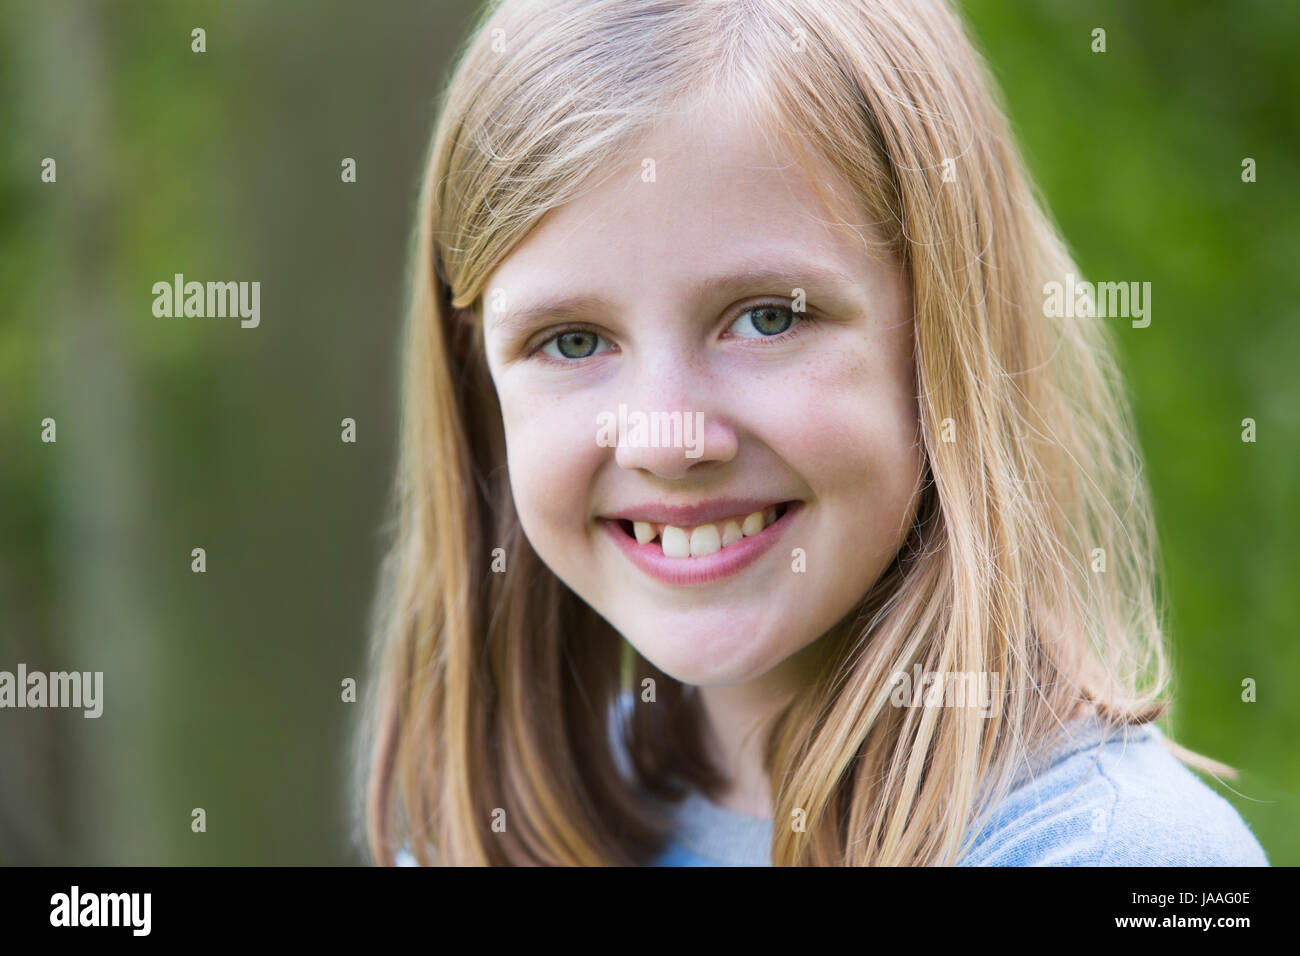 Portrait Of Smiling Pre Teen Girl Outdoors Stock Photo